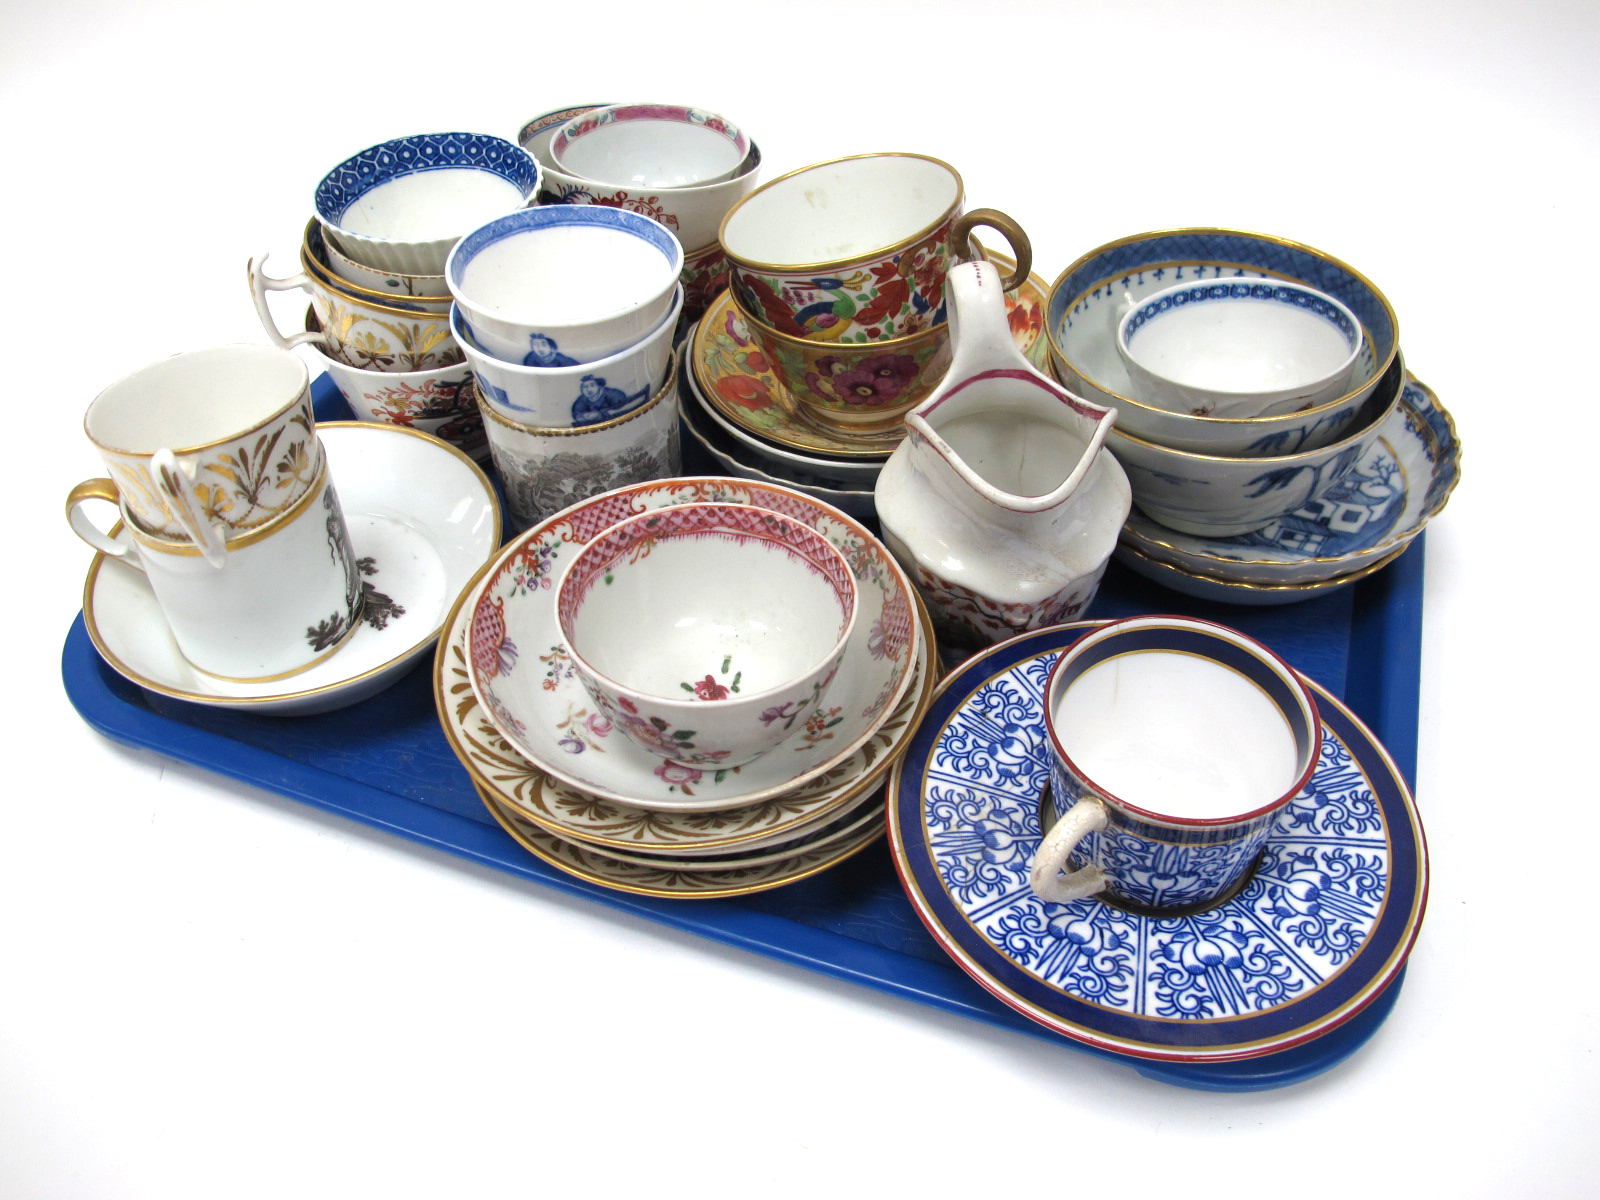 A Collection of Mainly English Tea Ware, some decorated in the chinoiserie style, including a